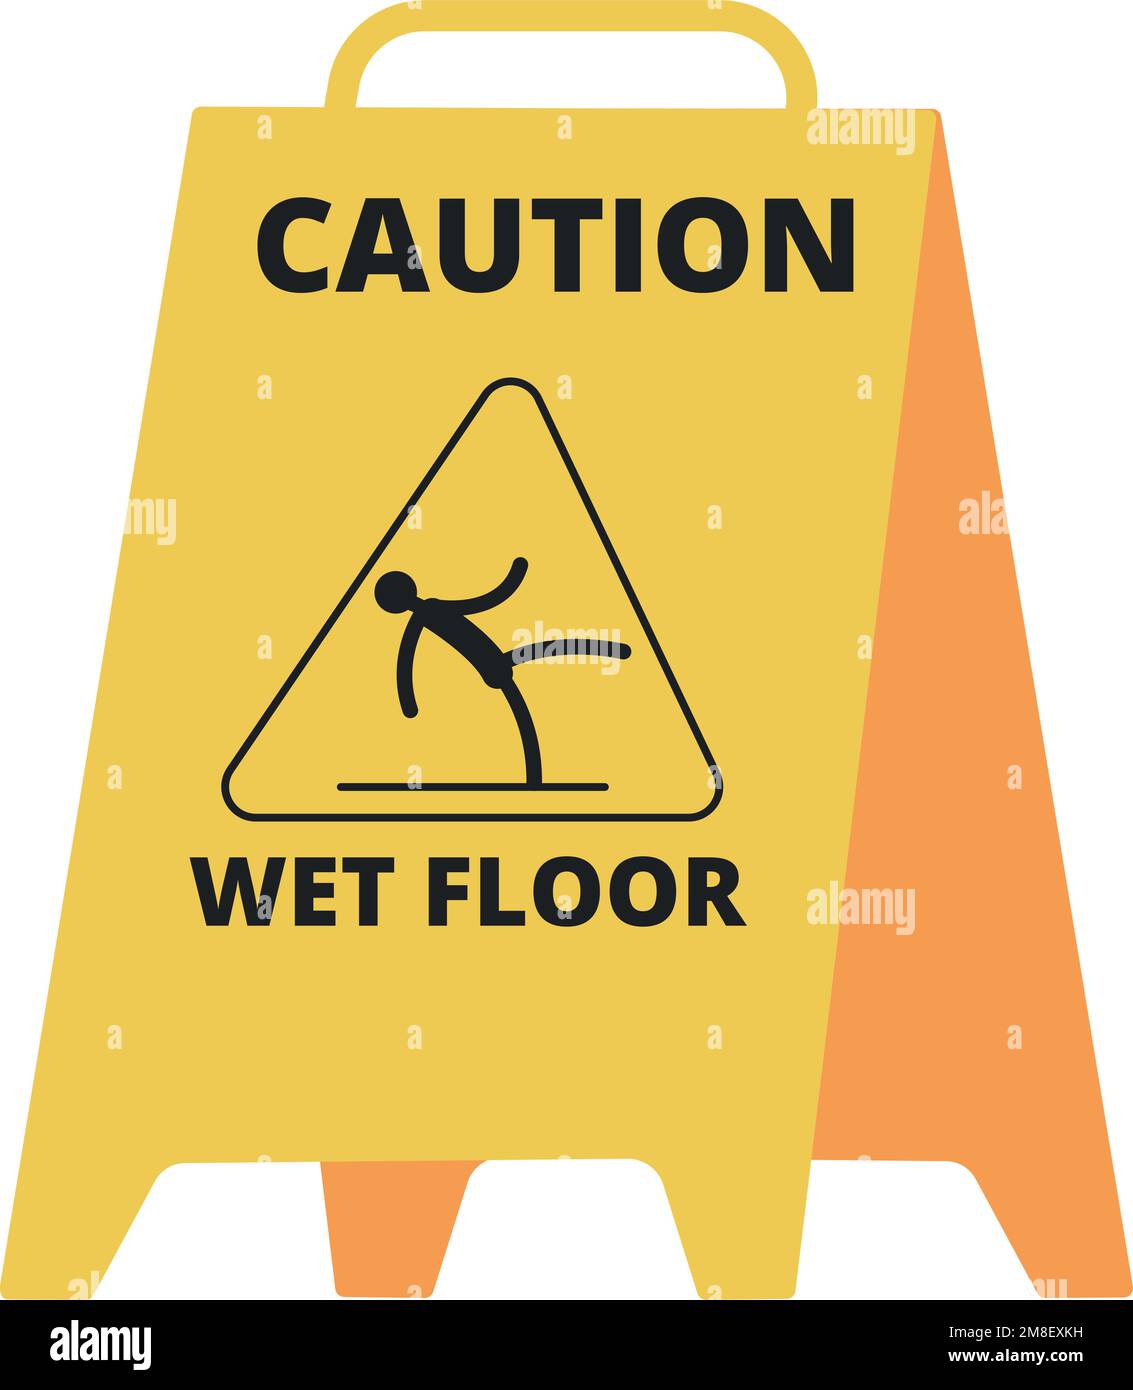 Wet floor sign. Yellow caution icon. Slippery warning isolated on white background Stock Vector